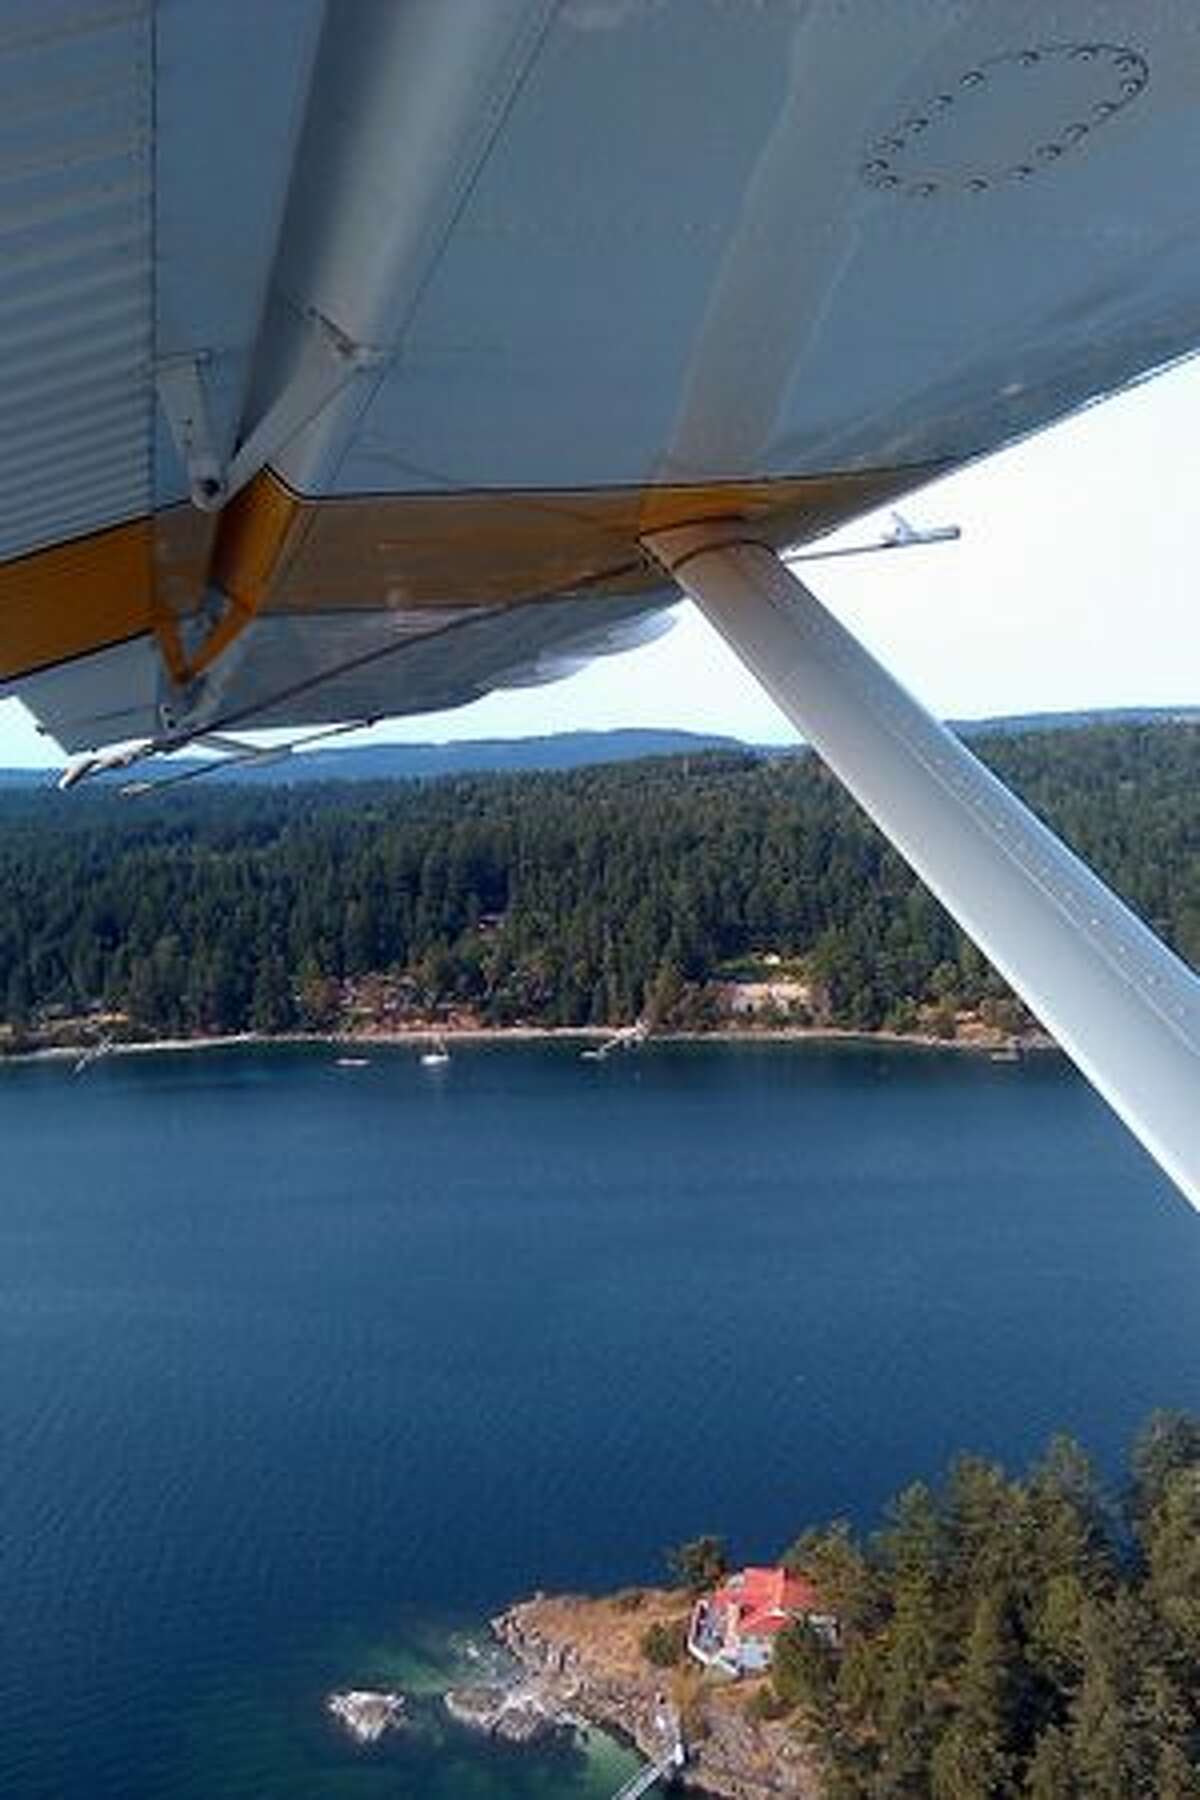 The from a Kenmore Air de Havilland Beaver shortly after takeoff from Ganges, B.C., to Lake Union, in Seattle, Wa.